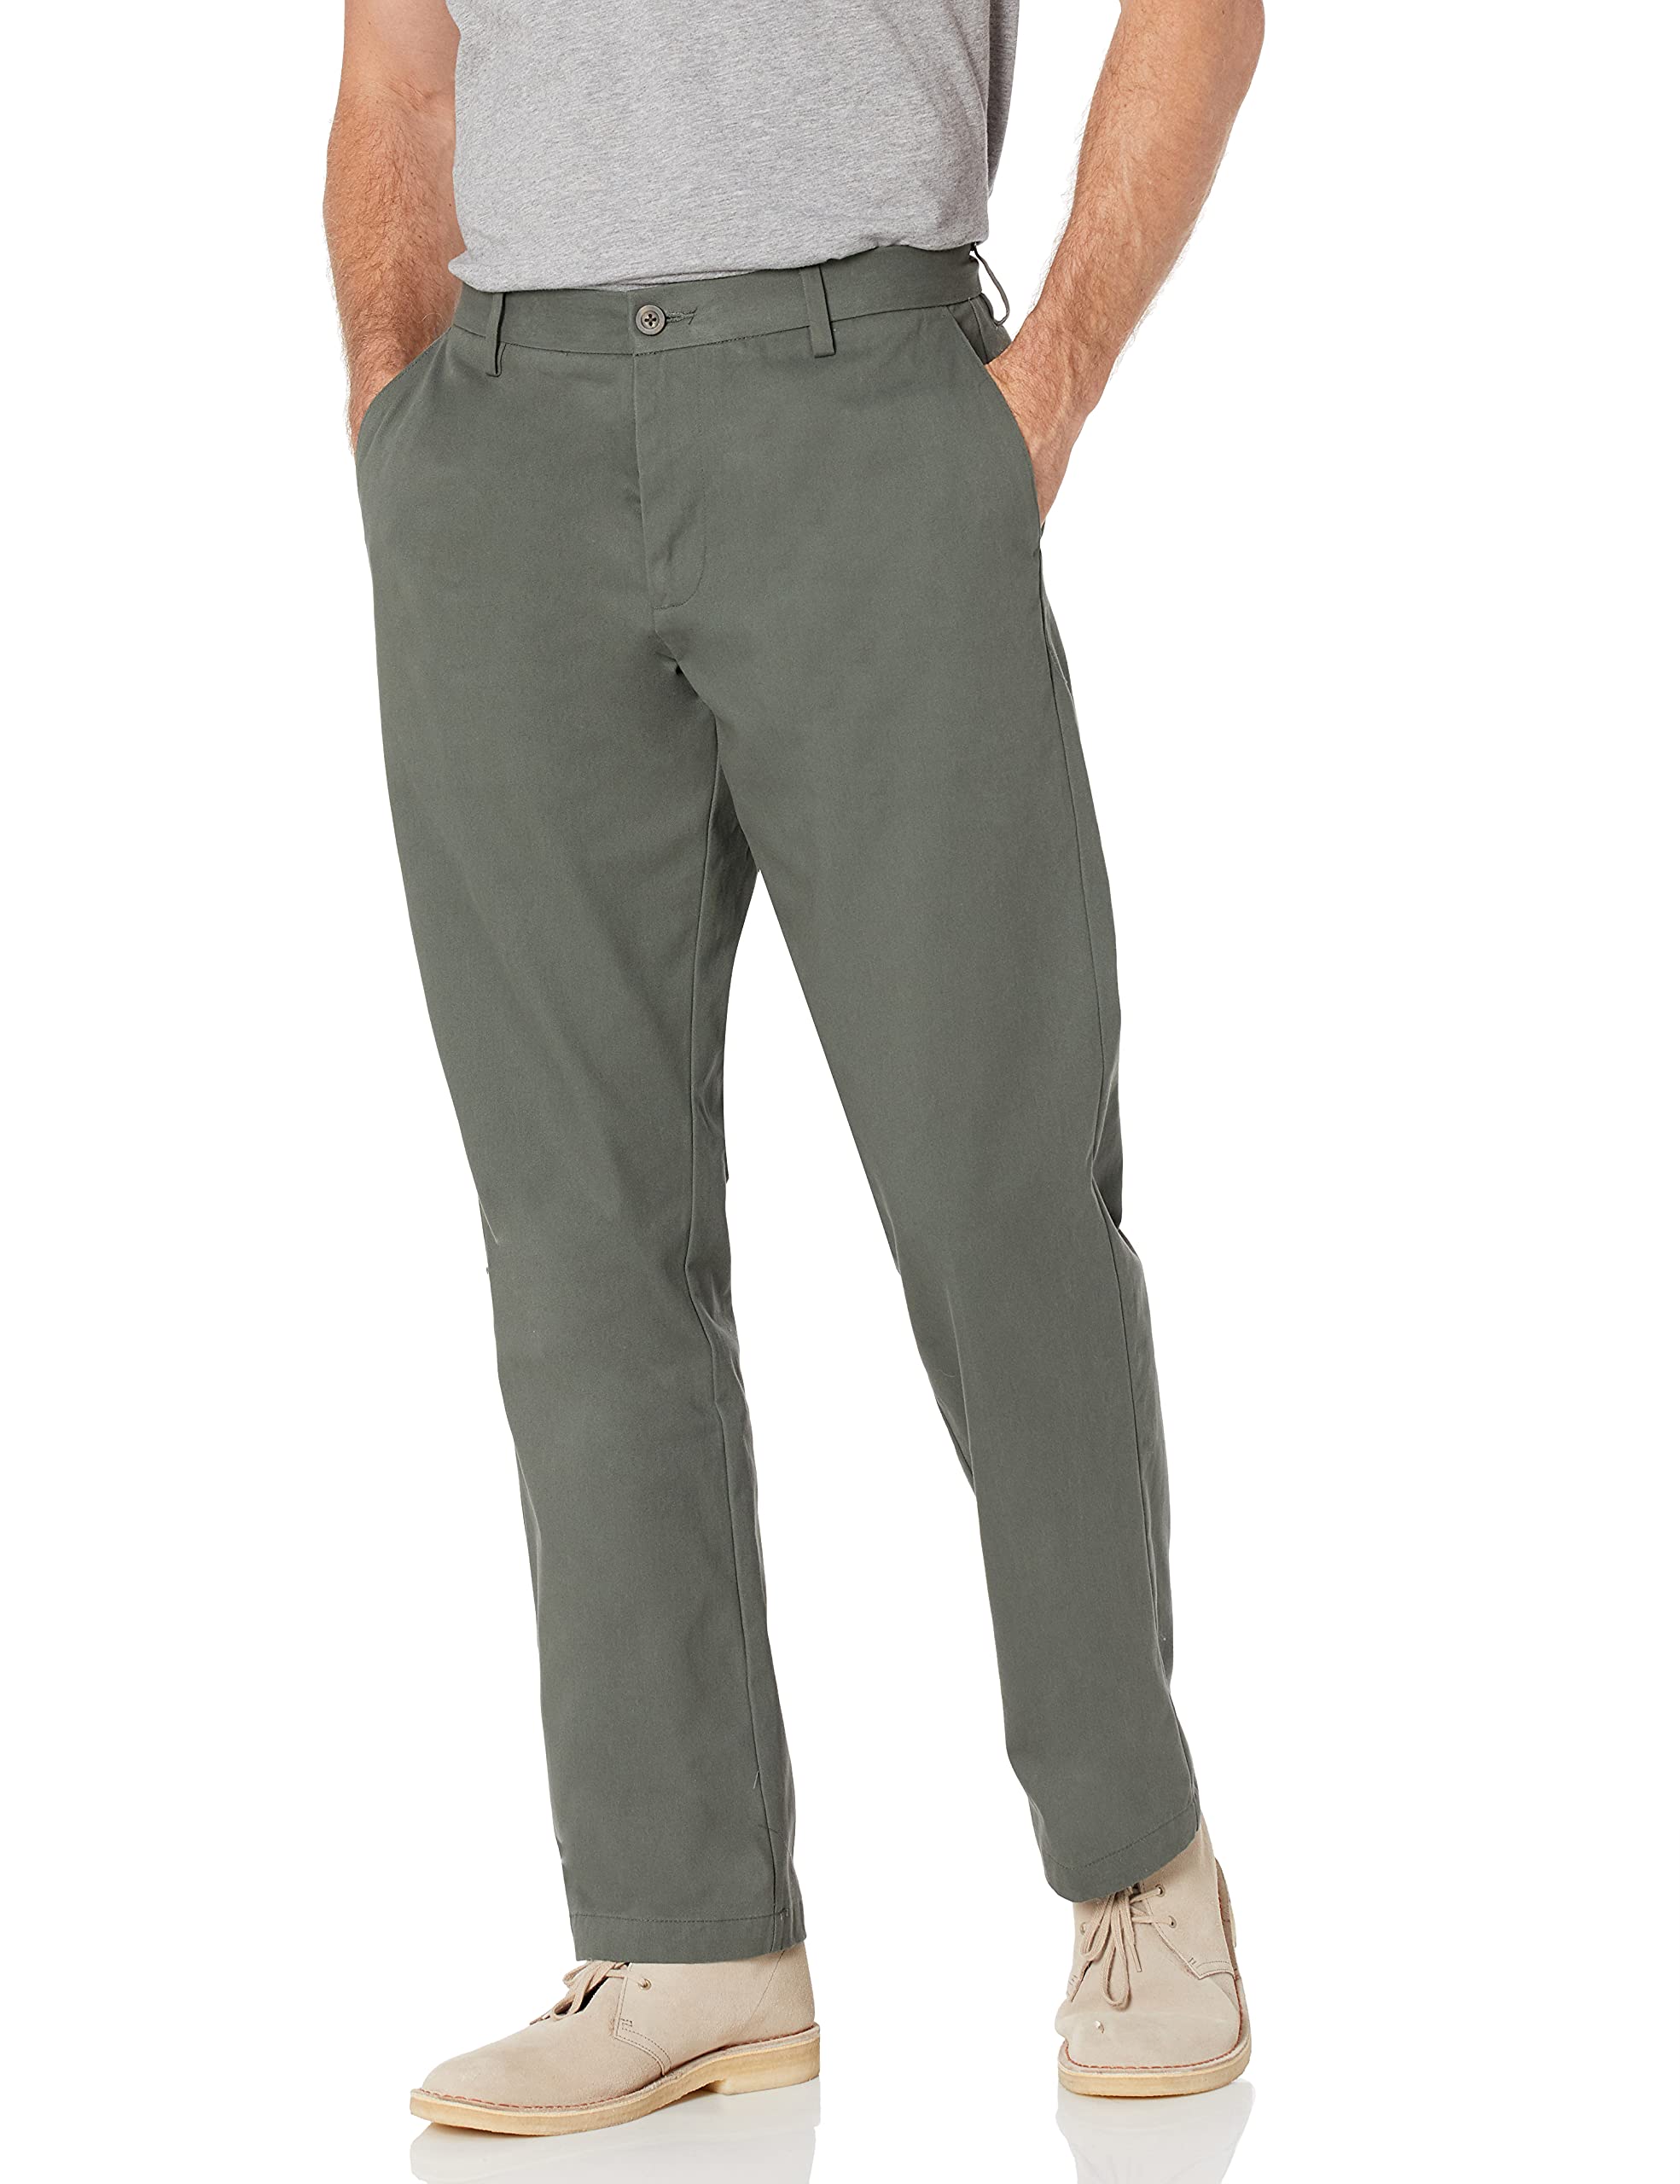 Amazon Essentials Men's Classic-Fit Wrinkle-Resistant Flat-Front Chino Pant (Available in Big & Tall)